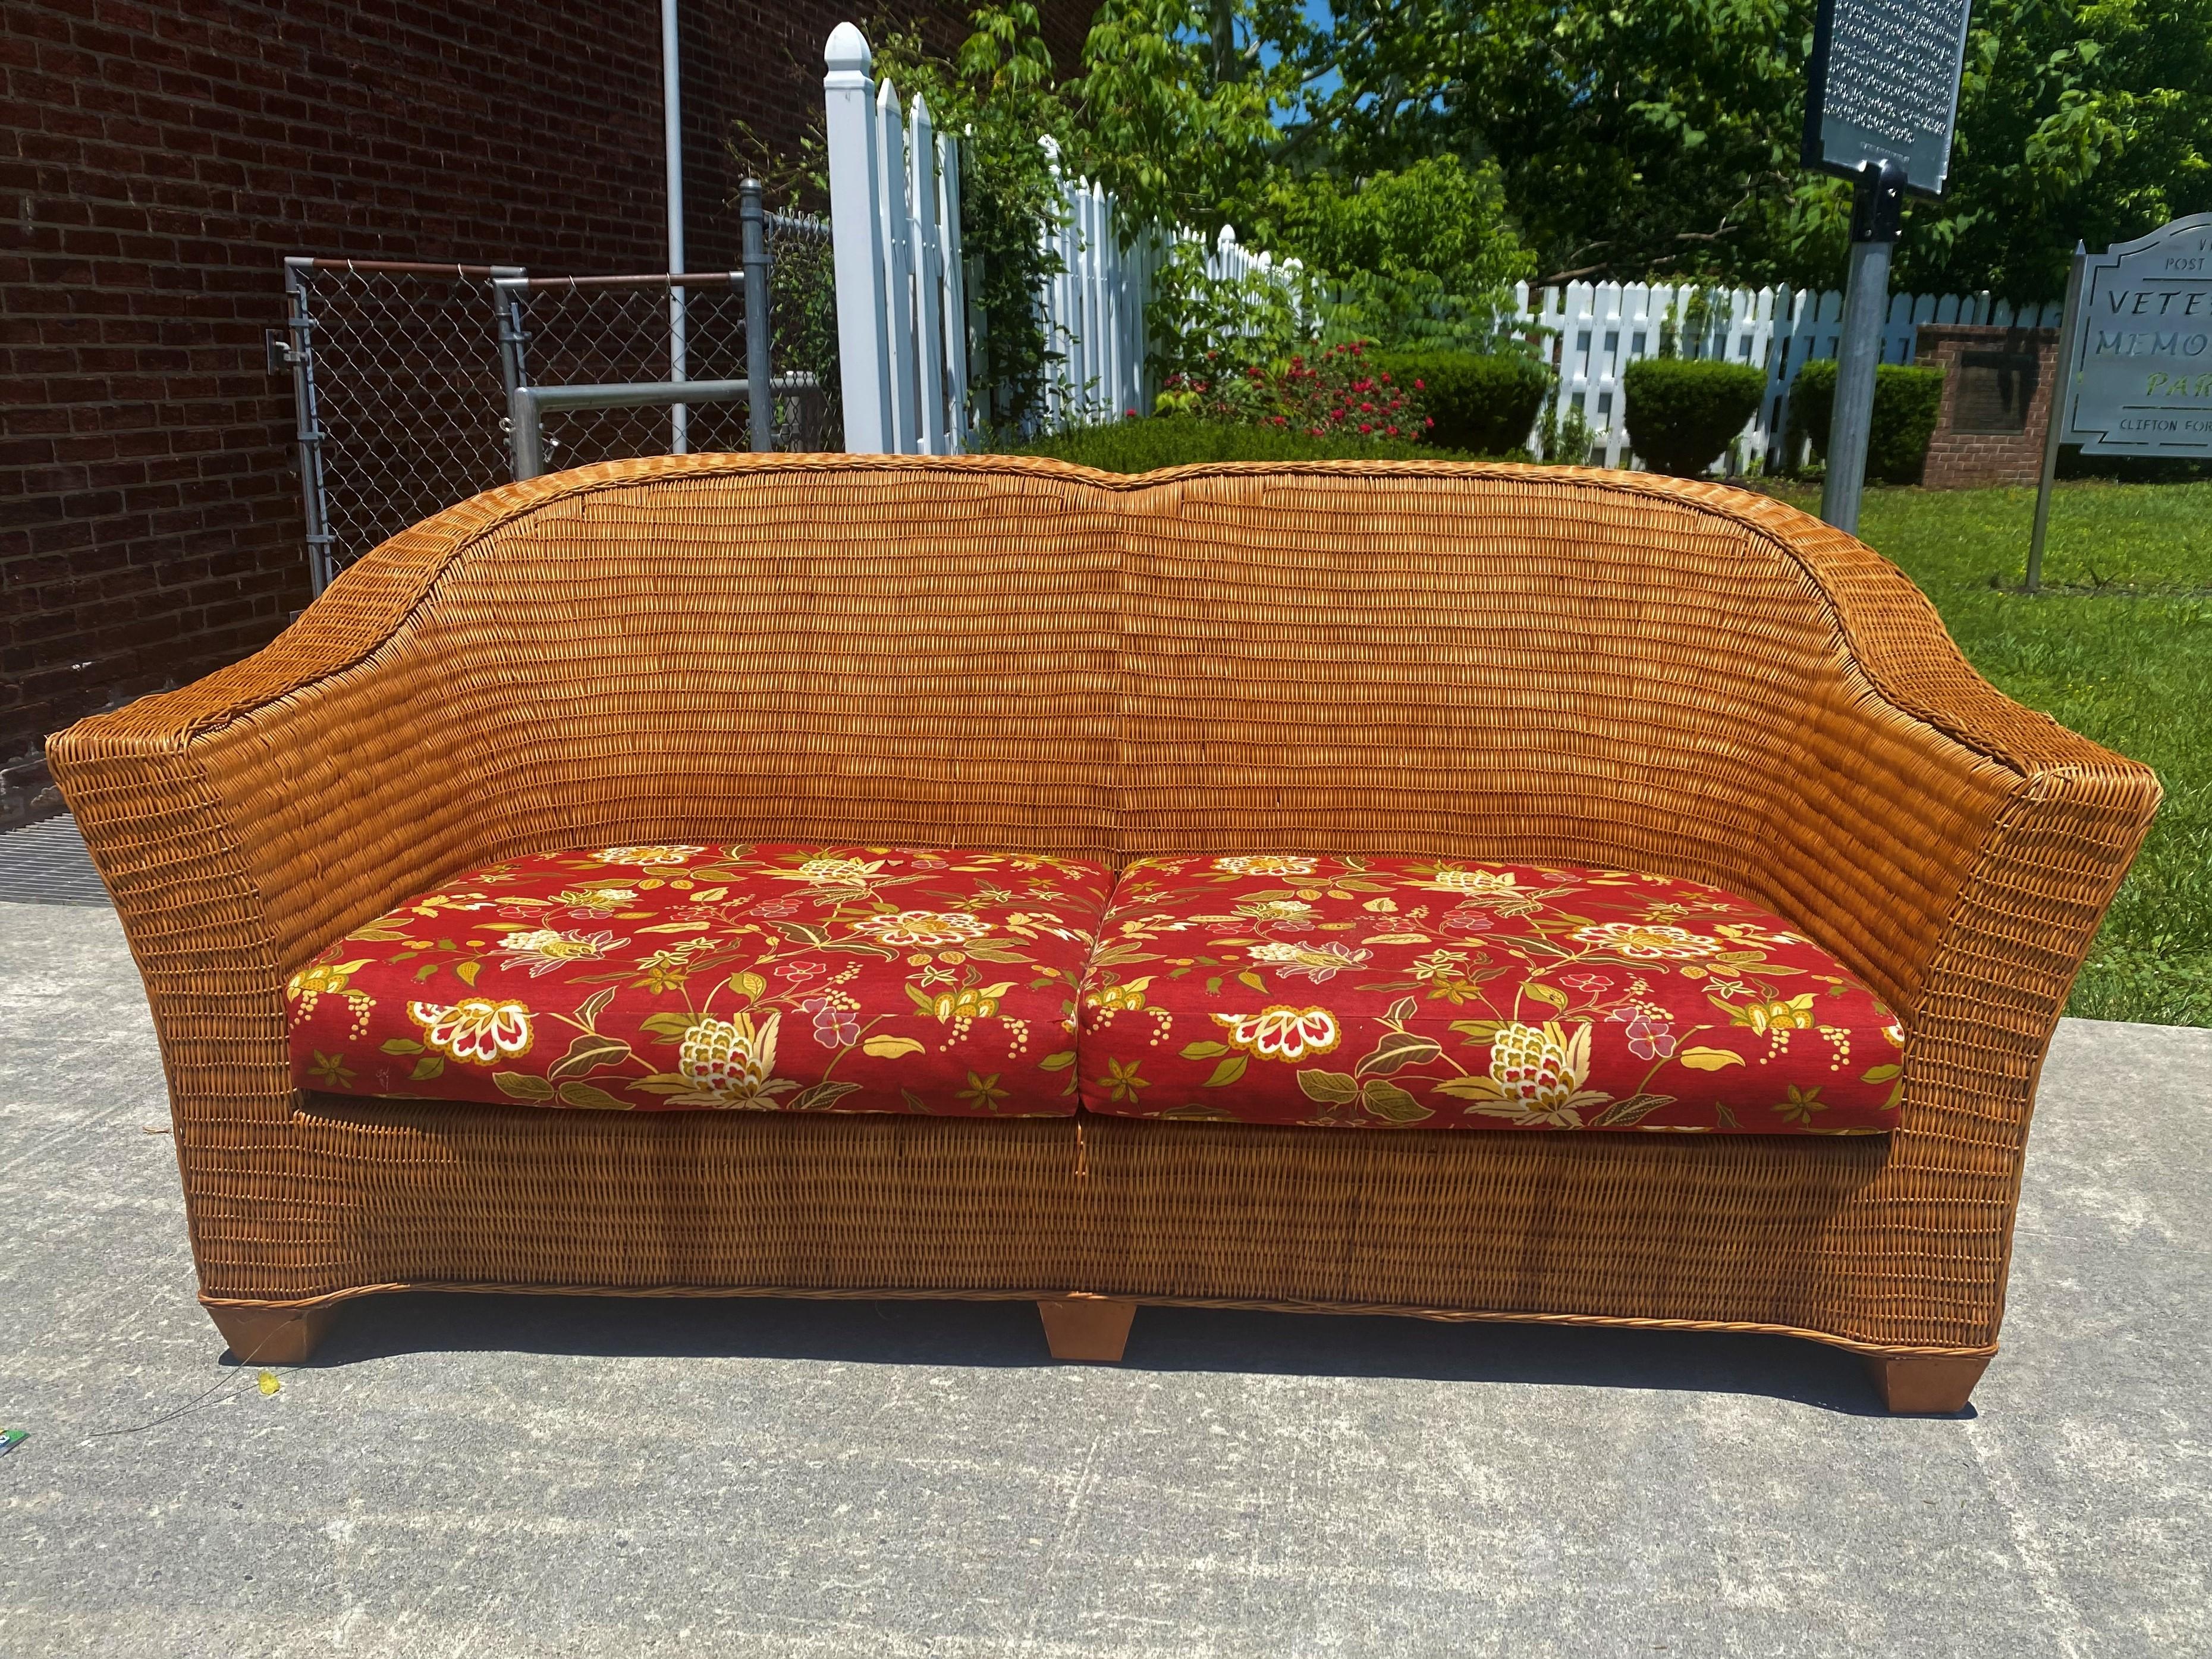 This is a wonderful modern style double hump back wicker sofa with beautiful brown & cranberry variegated background & floral upholstery which has a tag from M.C, Interiors & Fabrics, Gaithersburg, MD and a tag on the bottom of the sofa dating it